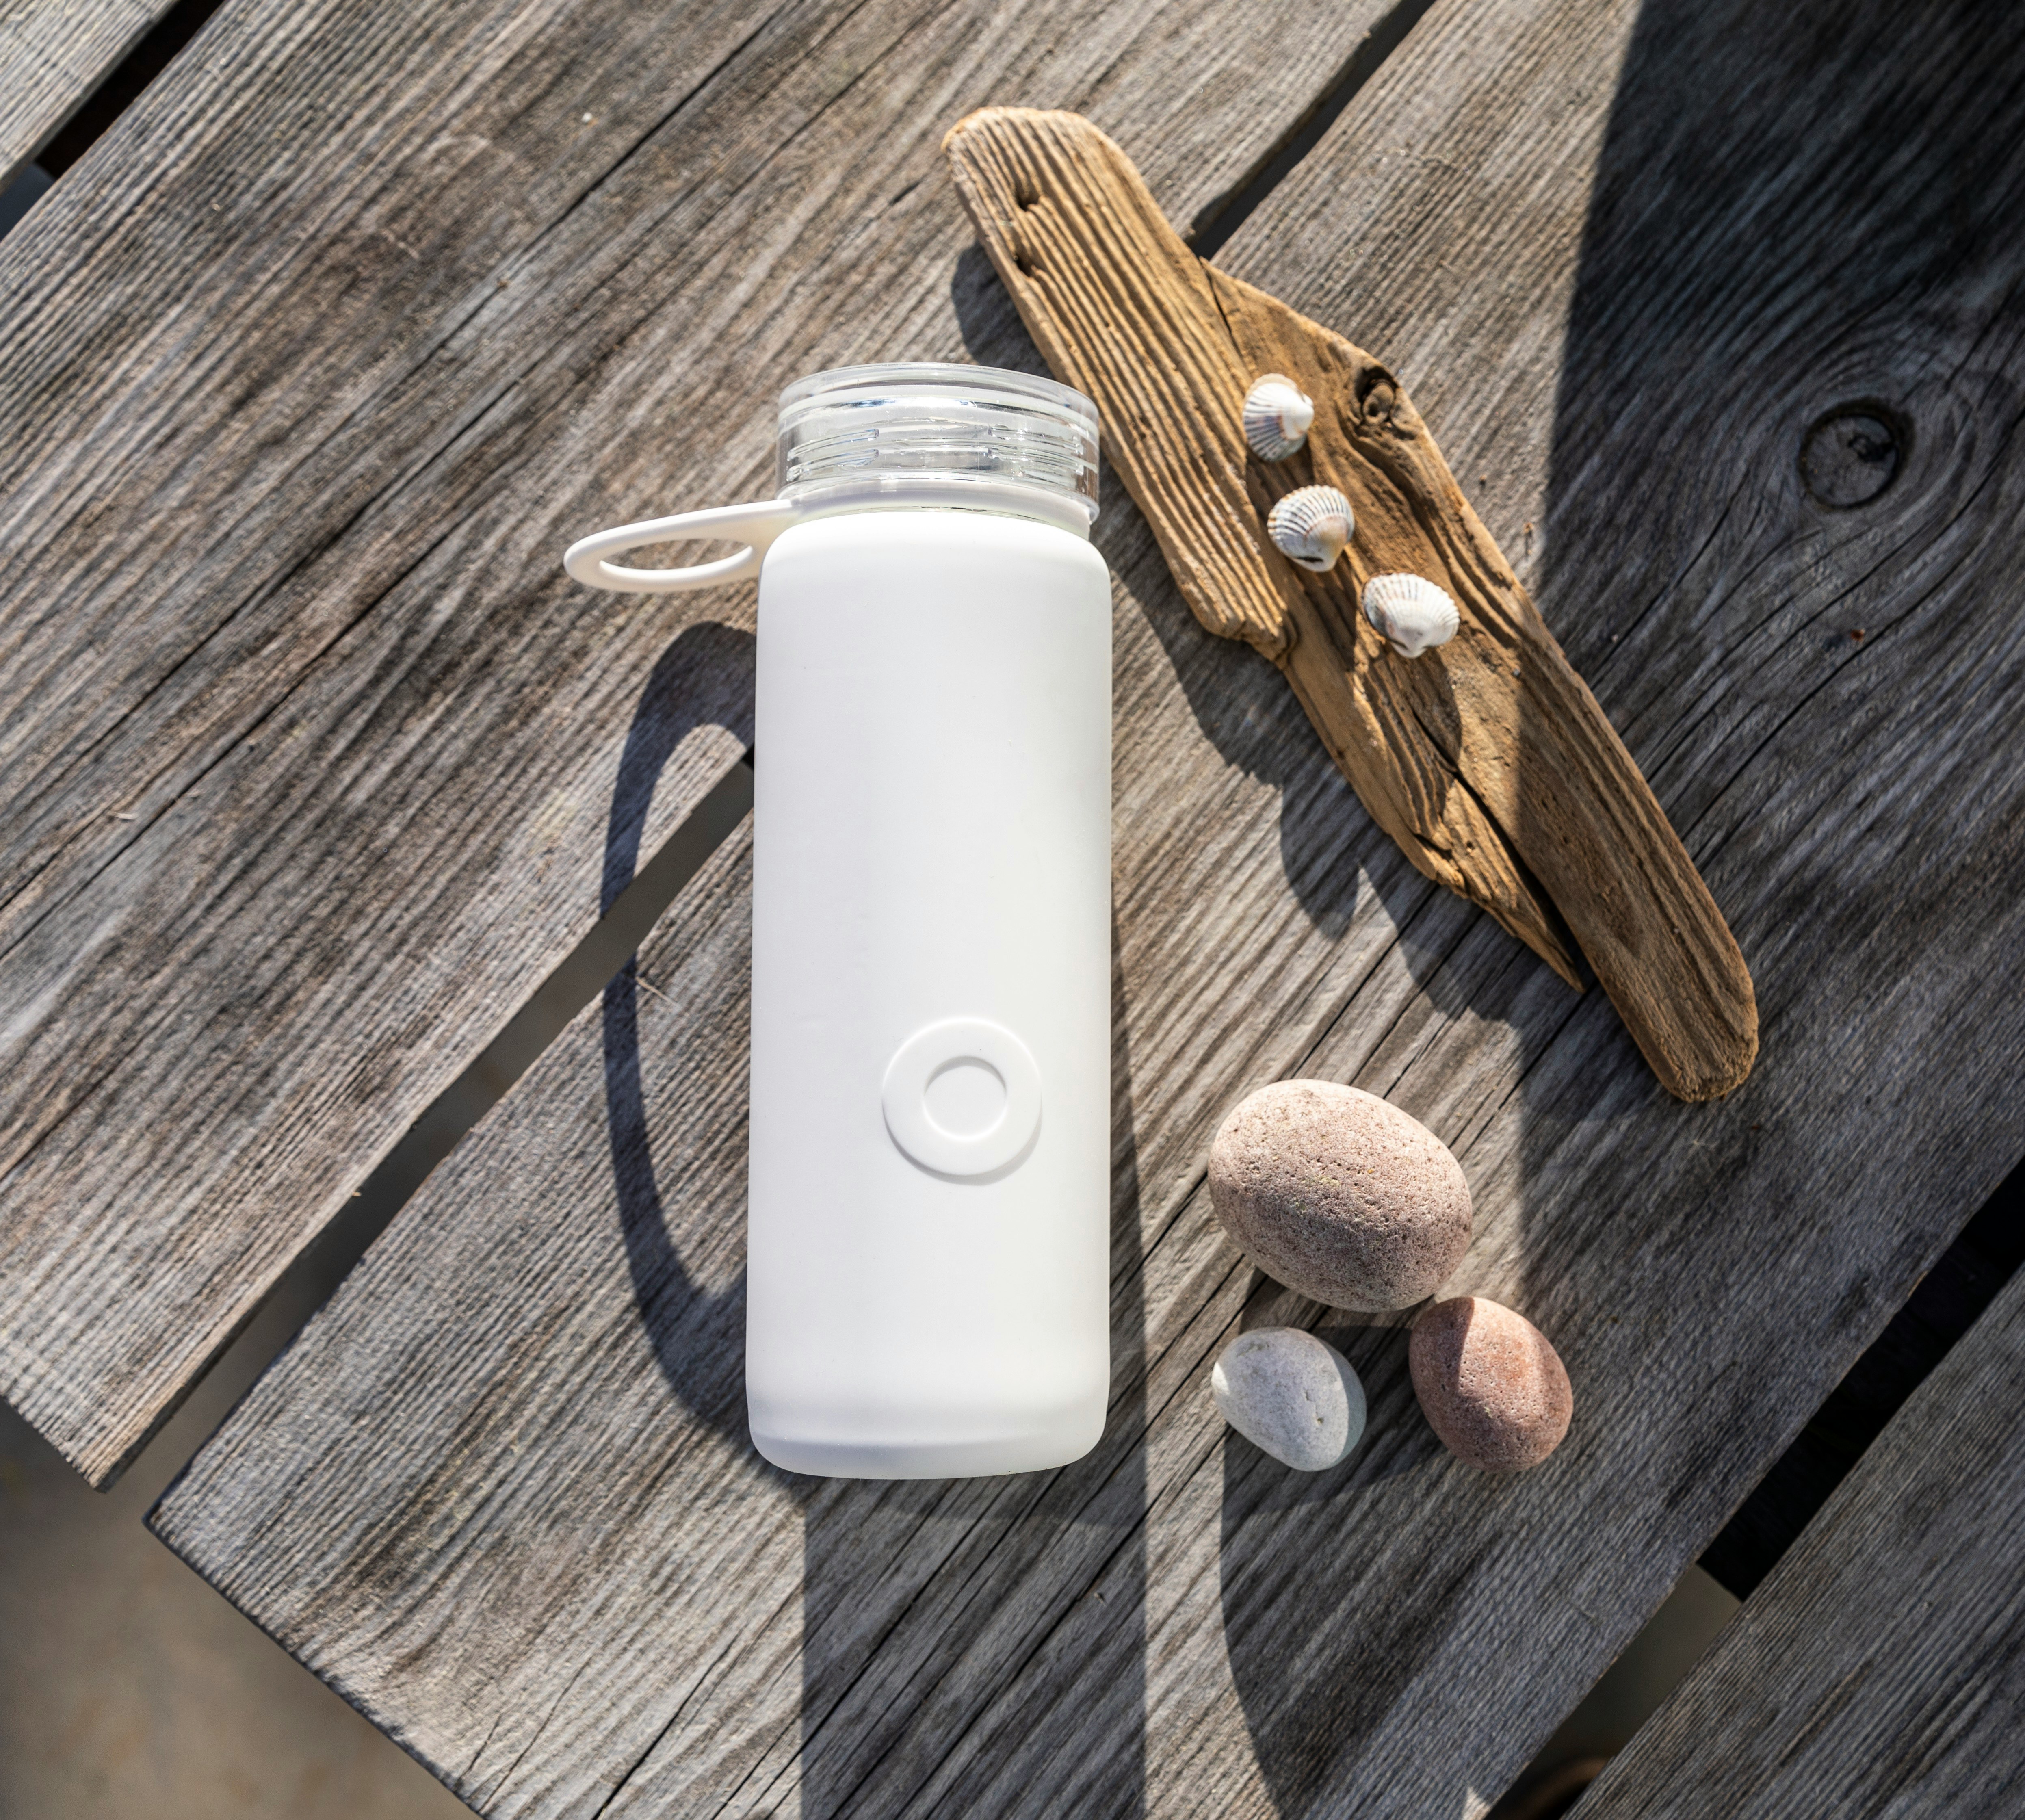 white apple remote beside brown wooden handle knife and white plastic bottle